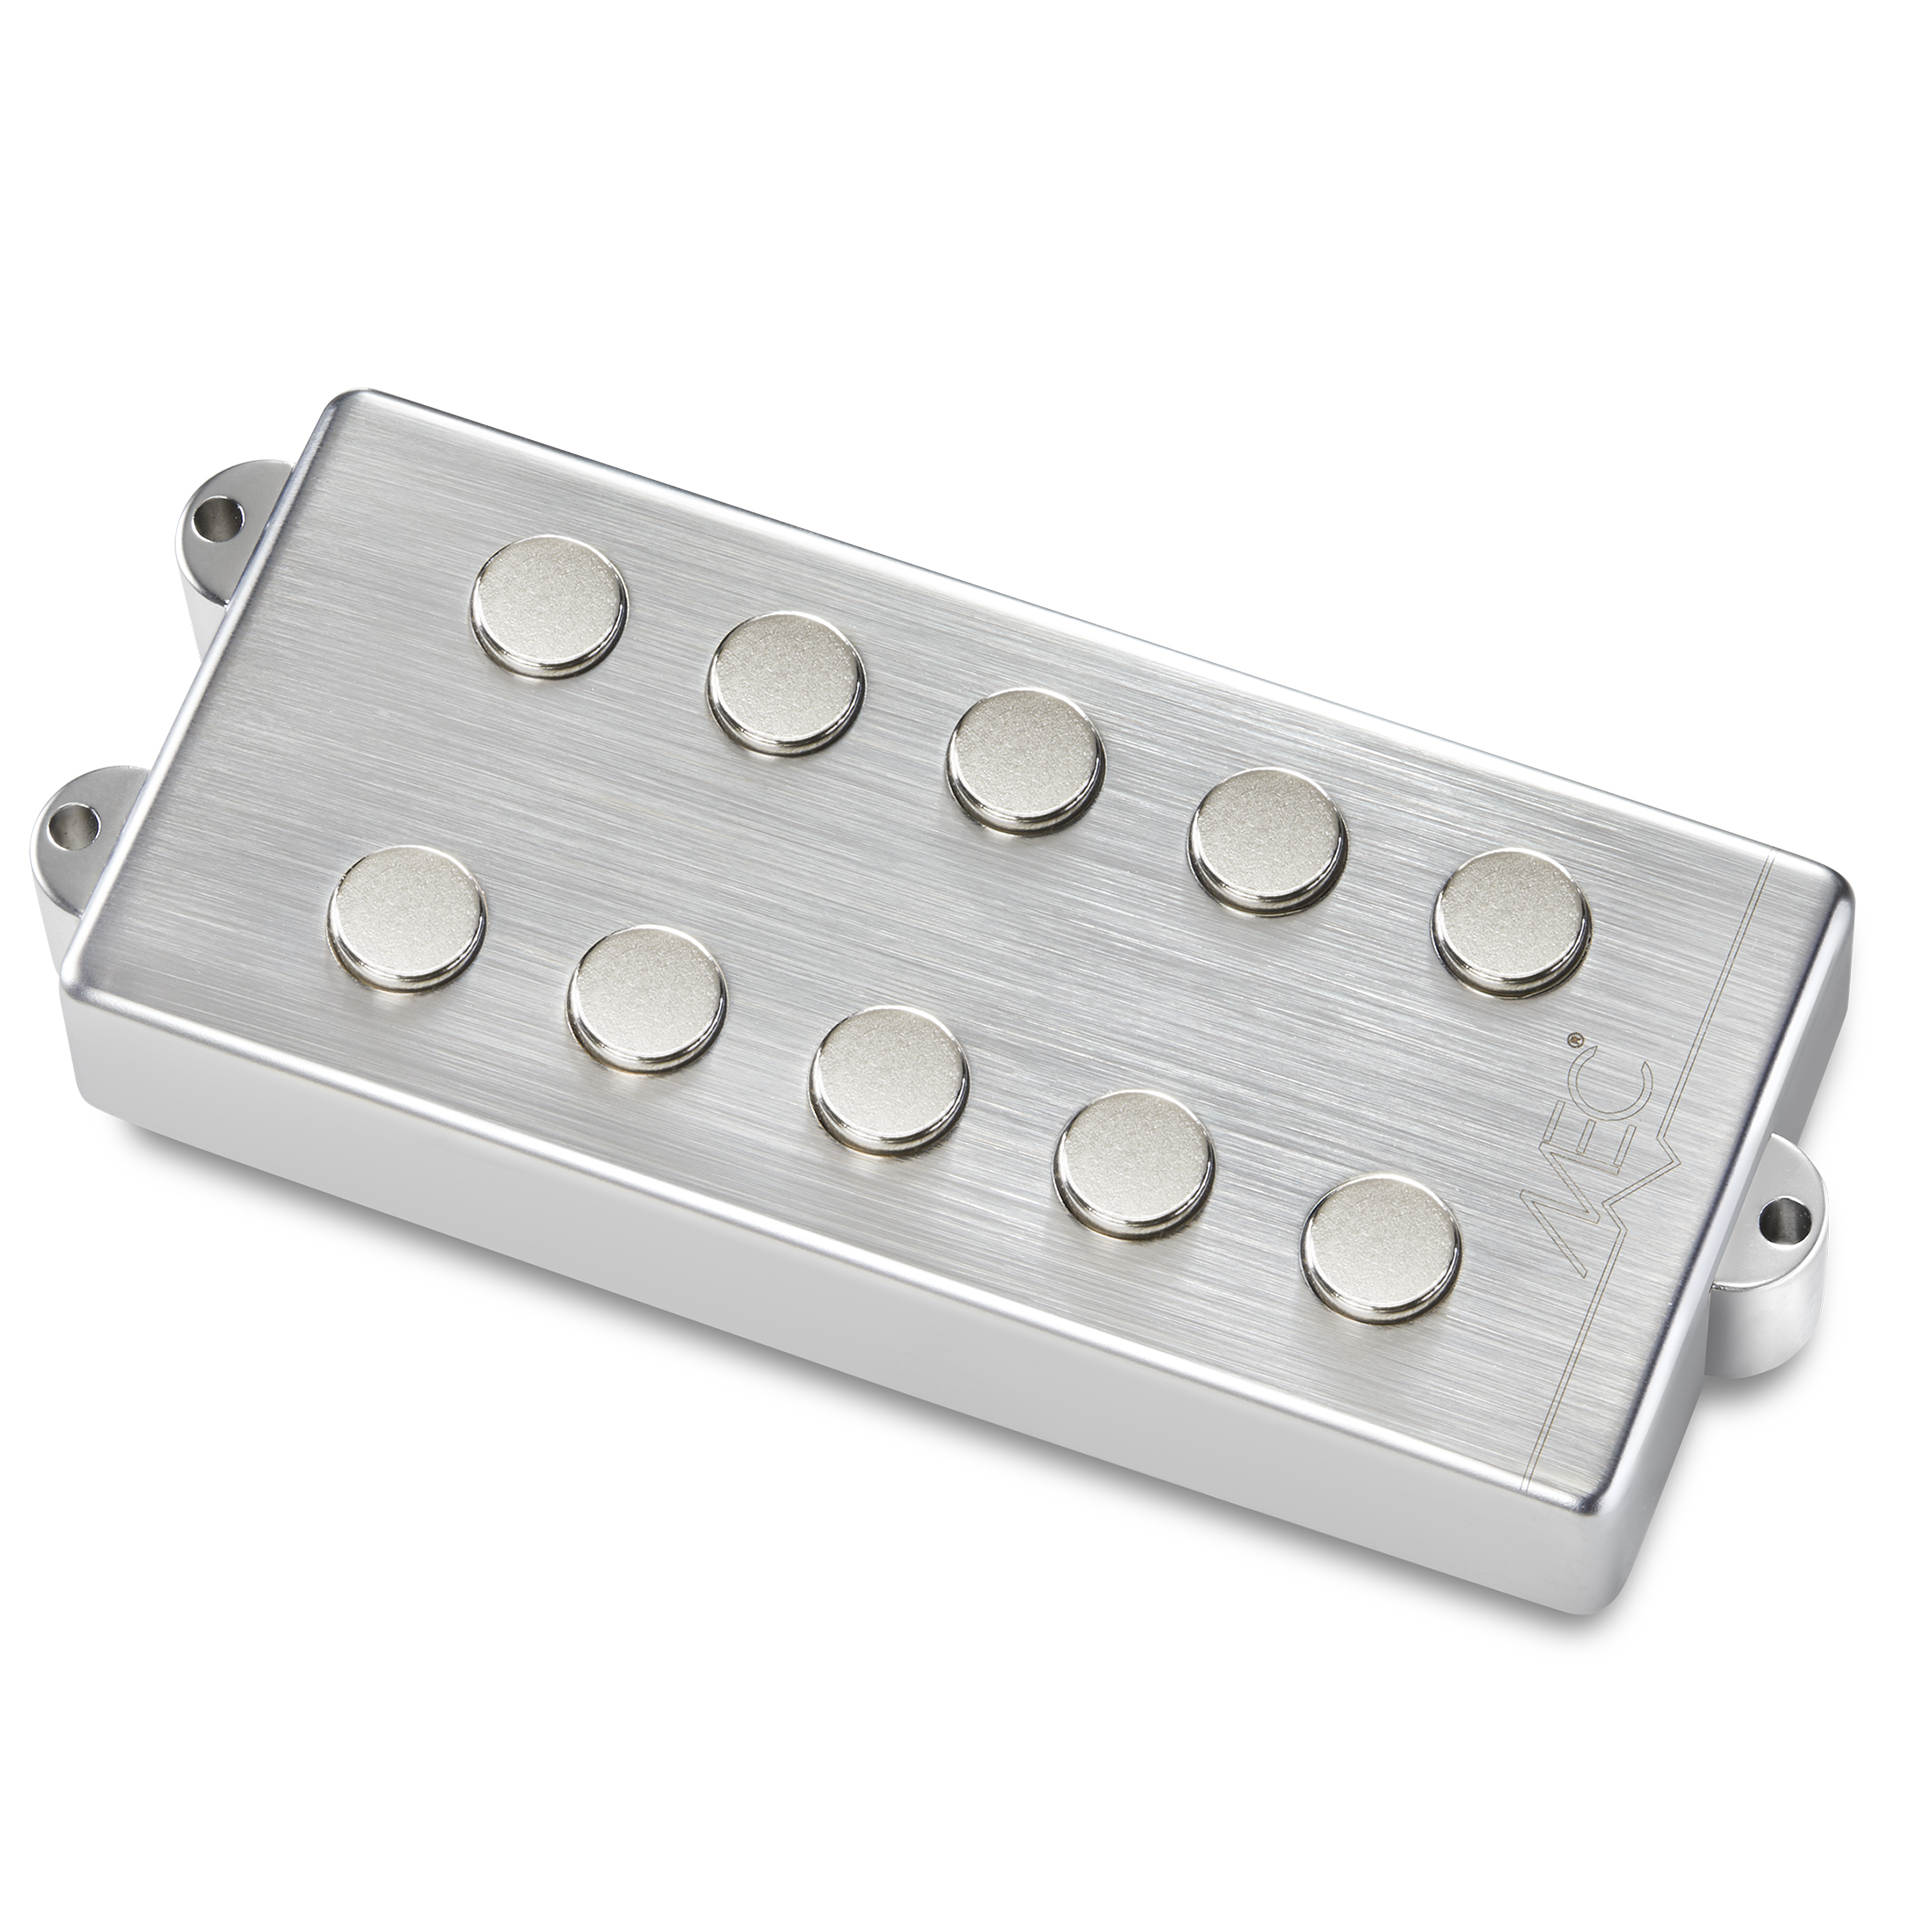 MEC Passive MM-Style Bass Pickup, Metal Cover, 5-String, Neck - Brushed Chrome